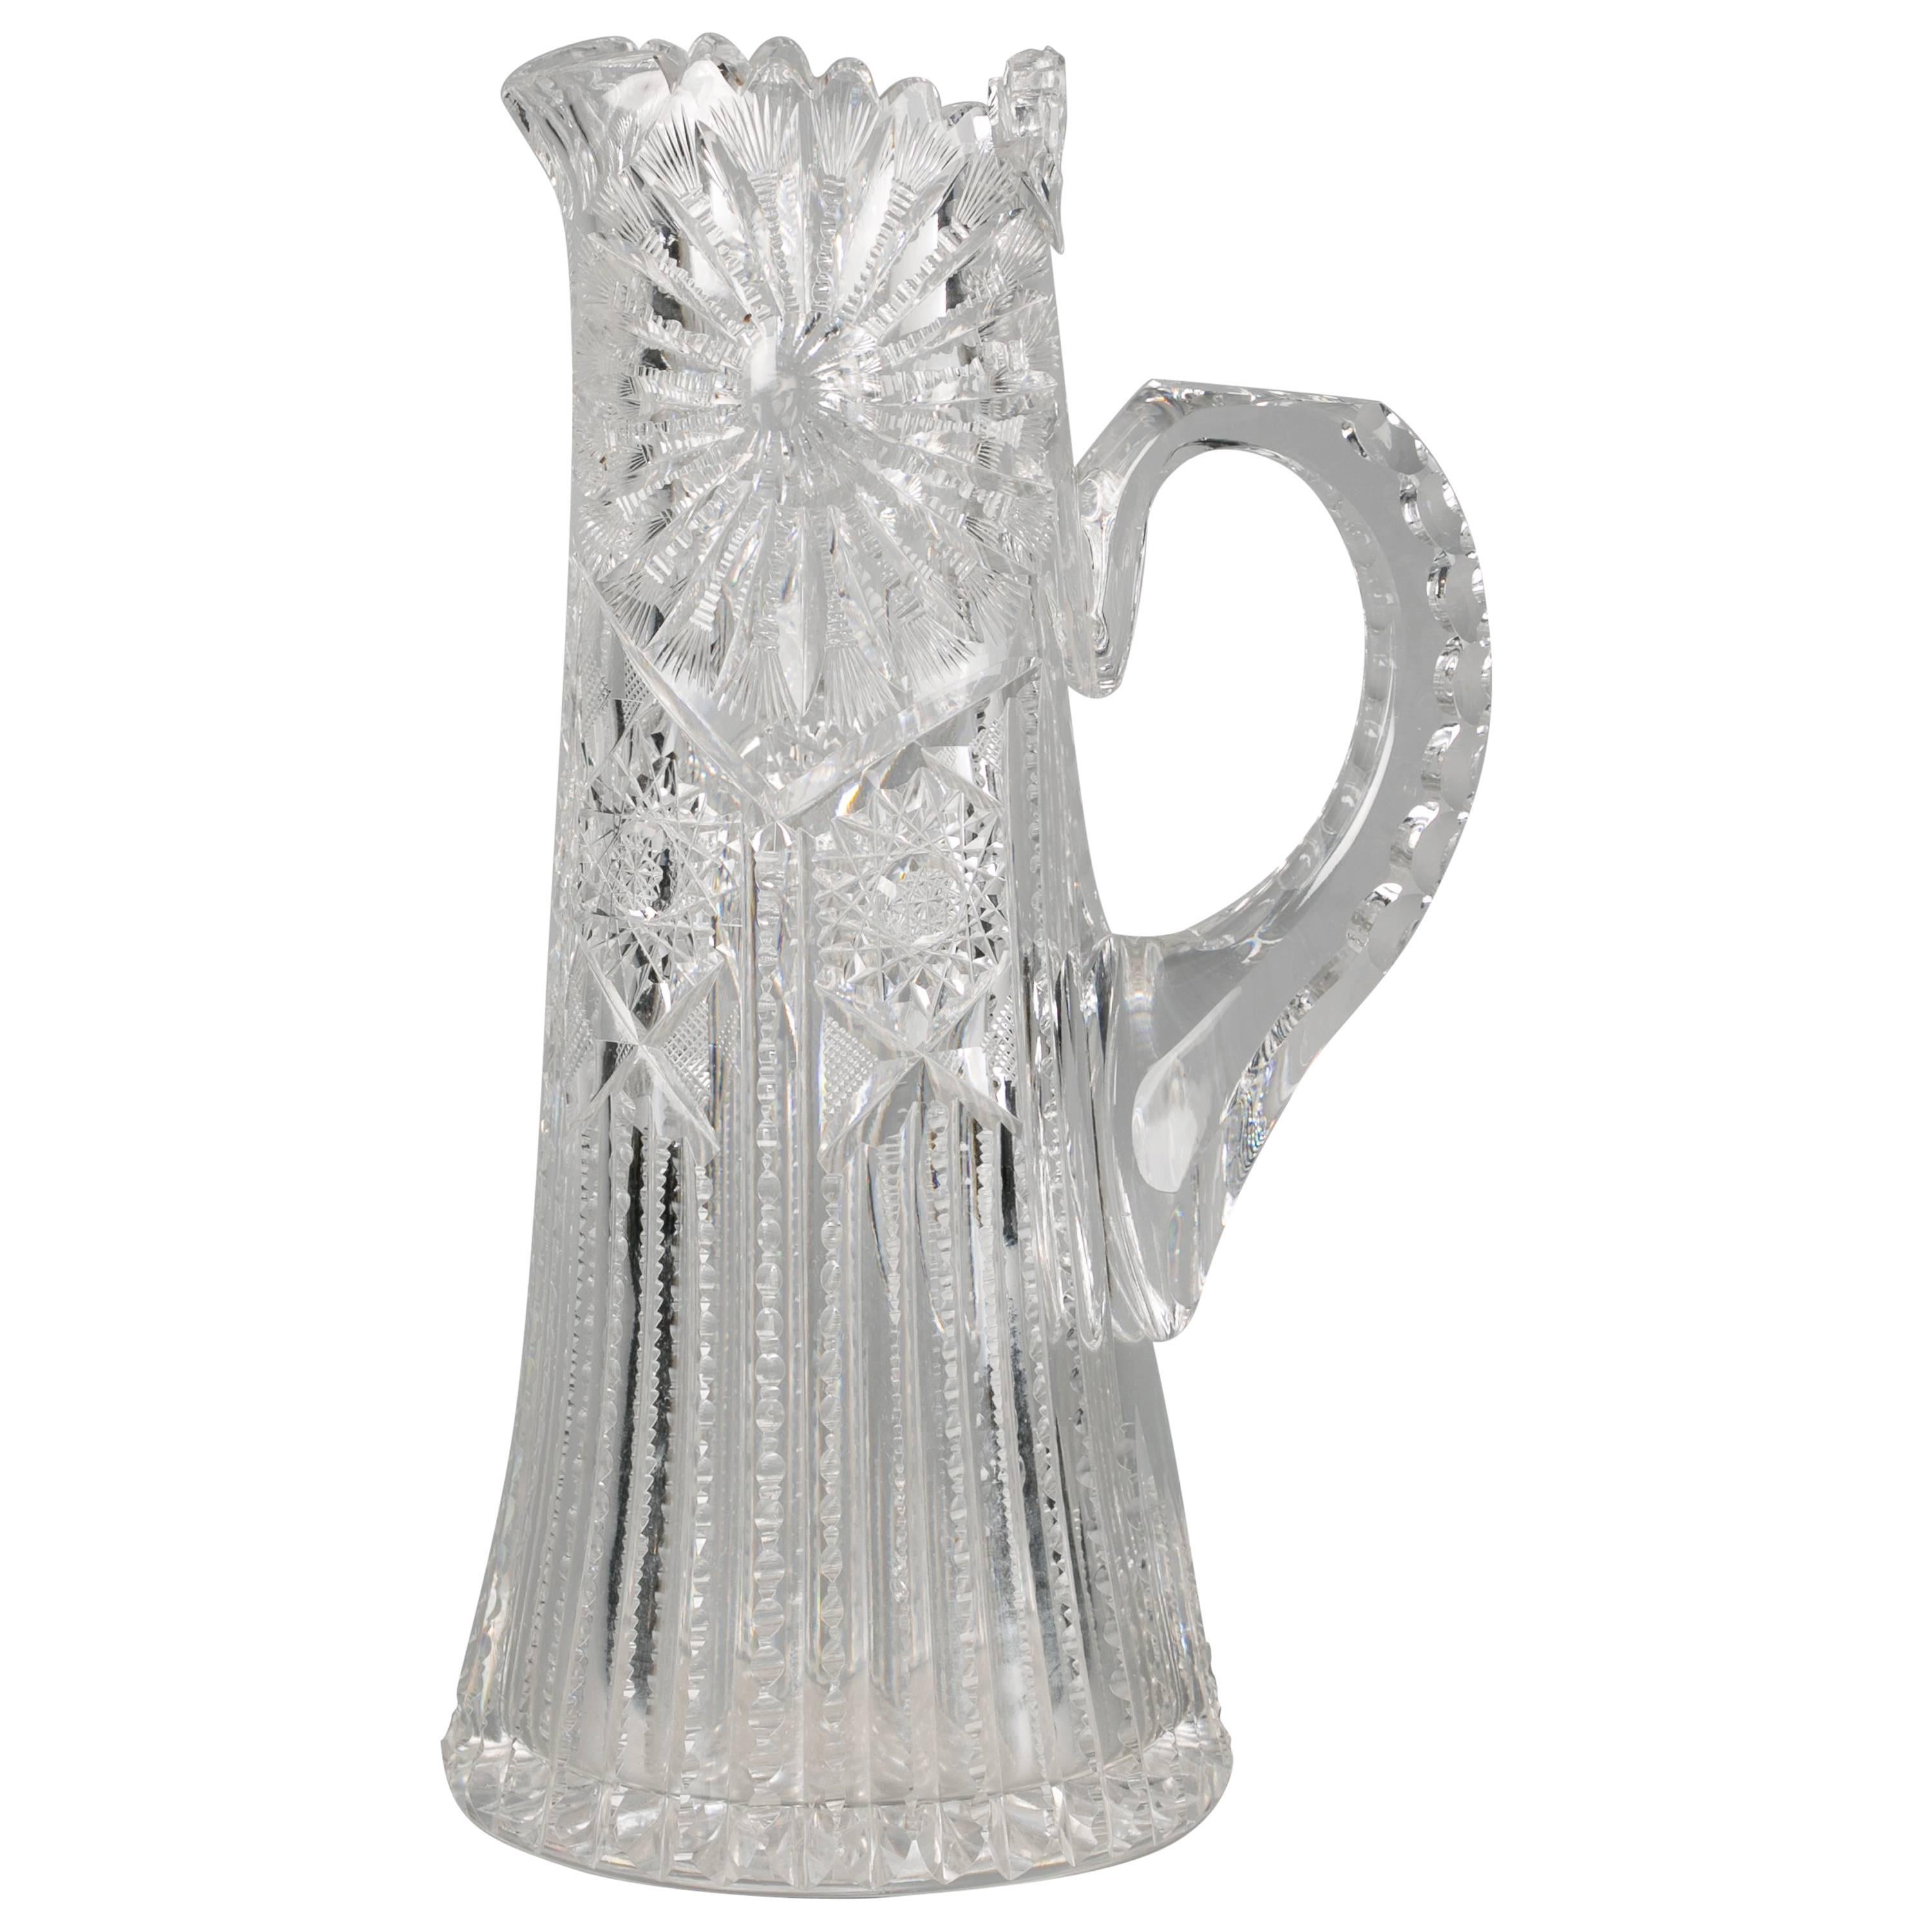 From the Early 20th Century Minor Damage of about 1 Nicely Priced. Vintage 8\u00d77 14\u00d74 Cut Glass Pitcher View all Pictures Carefully